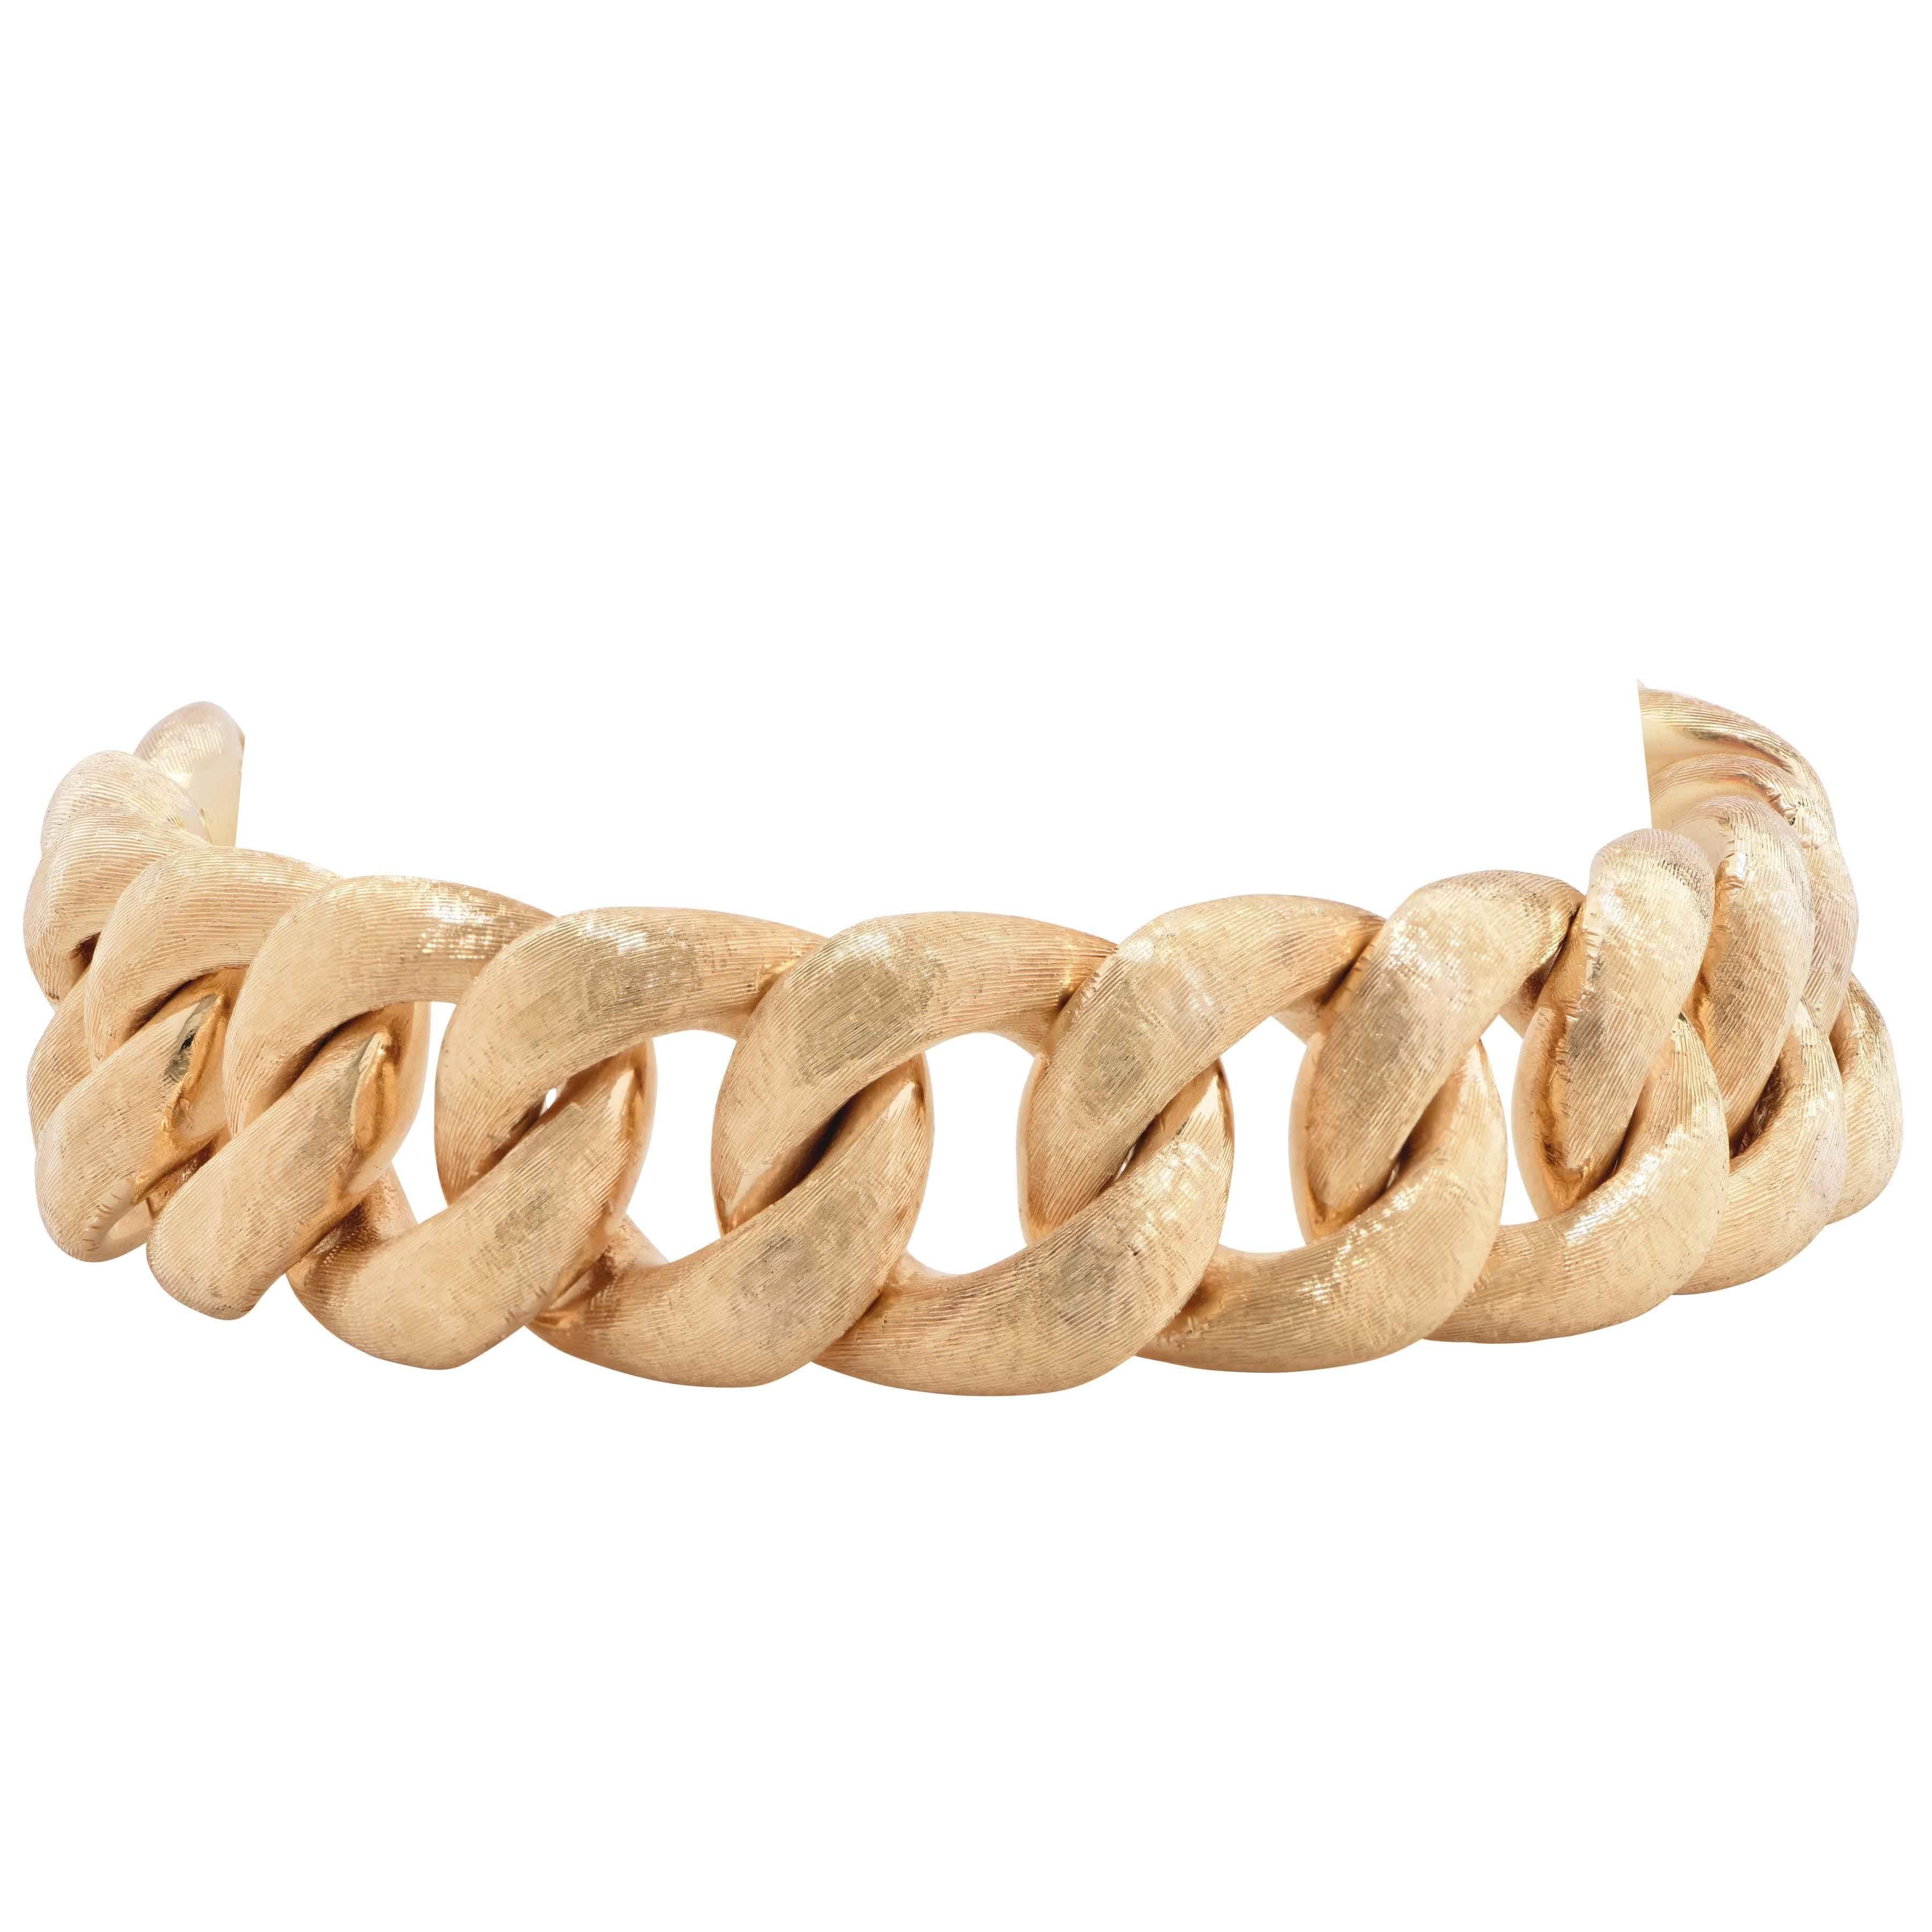 Yellow gold link bracelet 8 inches long. This is a chunky bracelet which feels heavy.
14 Karat Yellow Gold
138.5 Grams